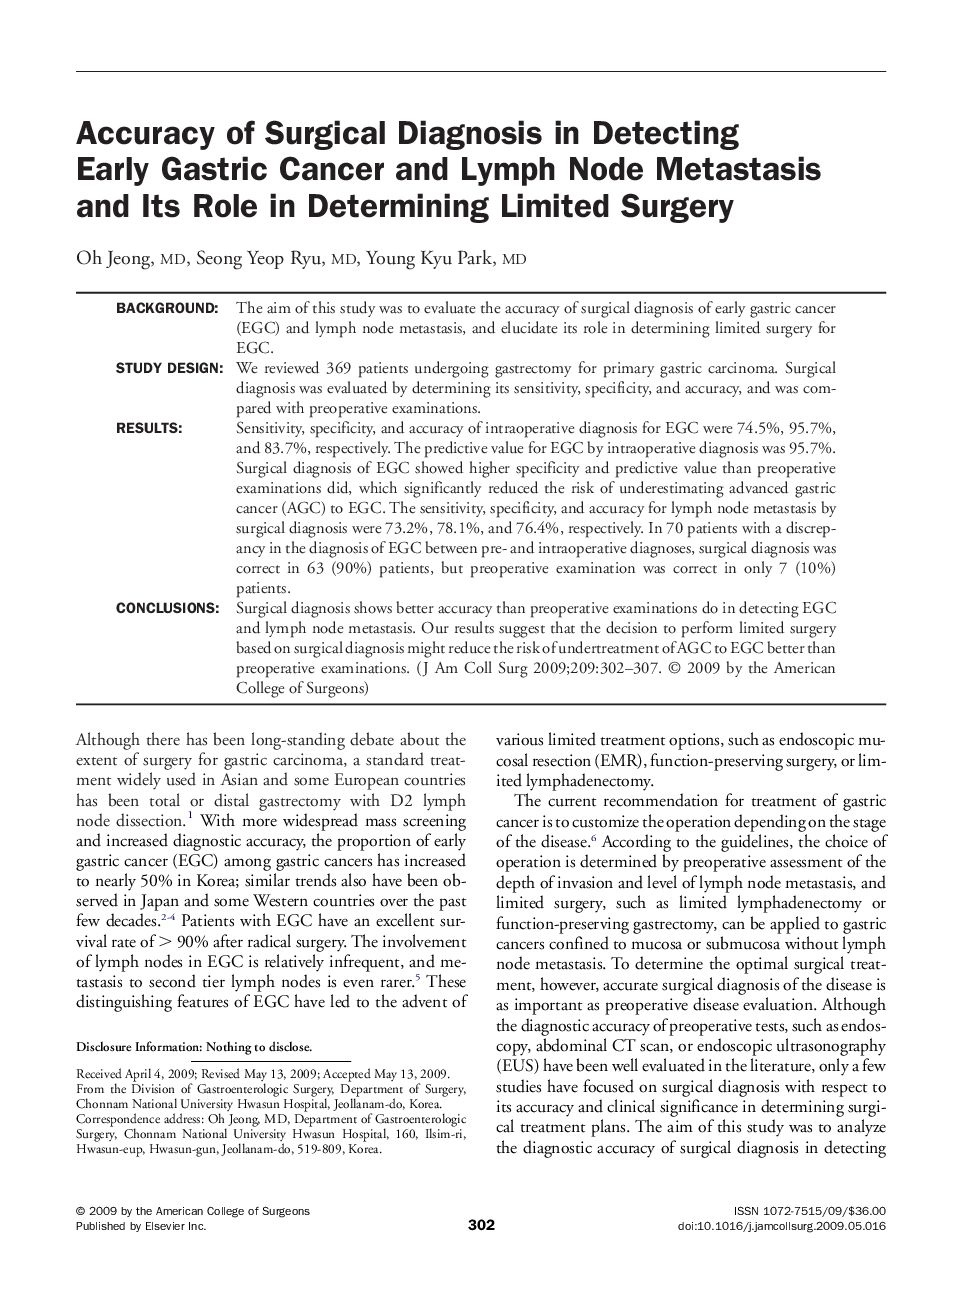 Accuracy of Surgical Diagnosis in Detecting Early Gastric Cancer and Lymph Node Metastasis and Its Role in Determining Limited Surgery 